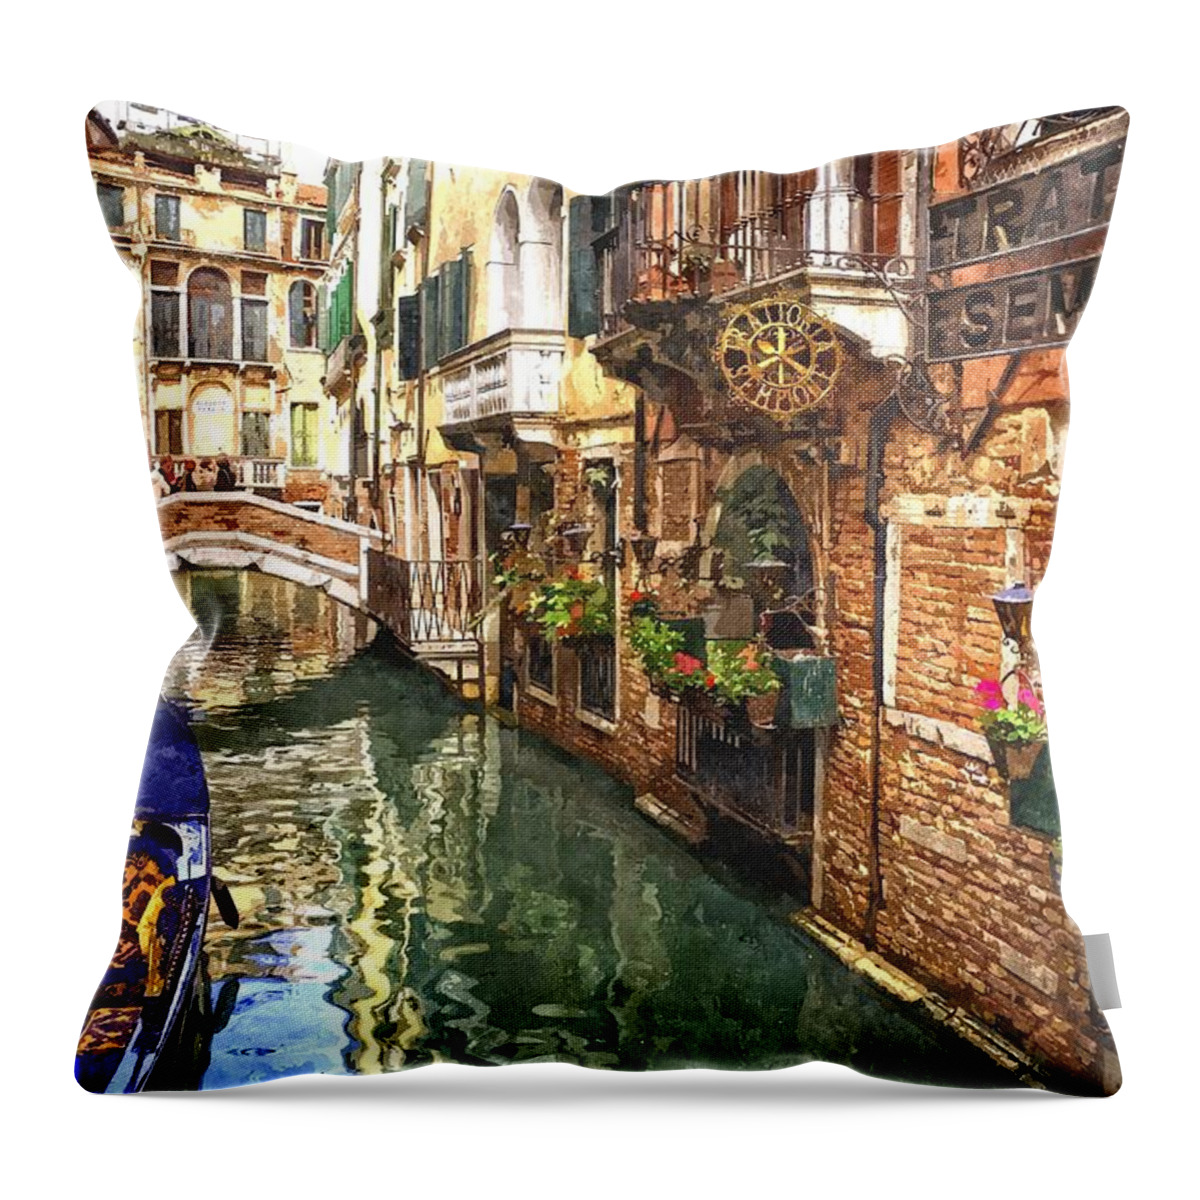 Venice Throw Pillow featuring the painting Venice Canal Serenity by Gianfranco Weiss